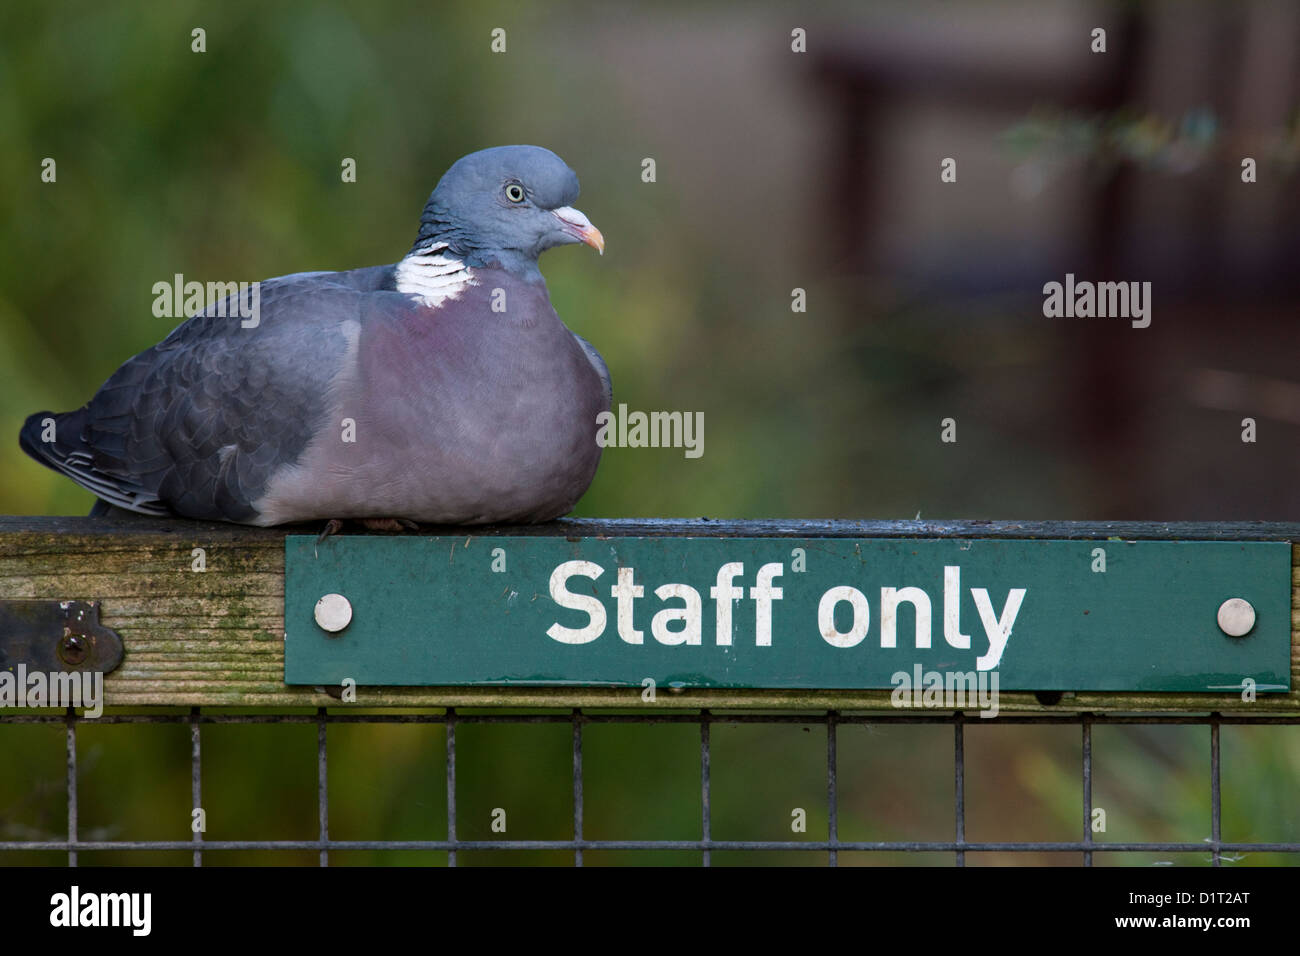 A woodpigeon on guard at a gate with a sign marked 'Staff only' Stock Photo